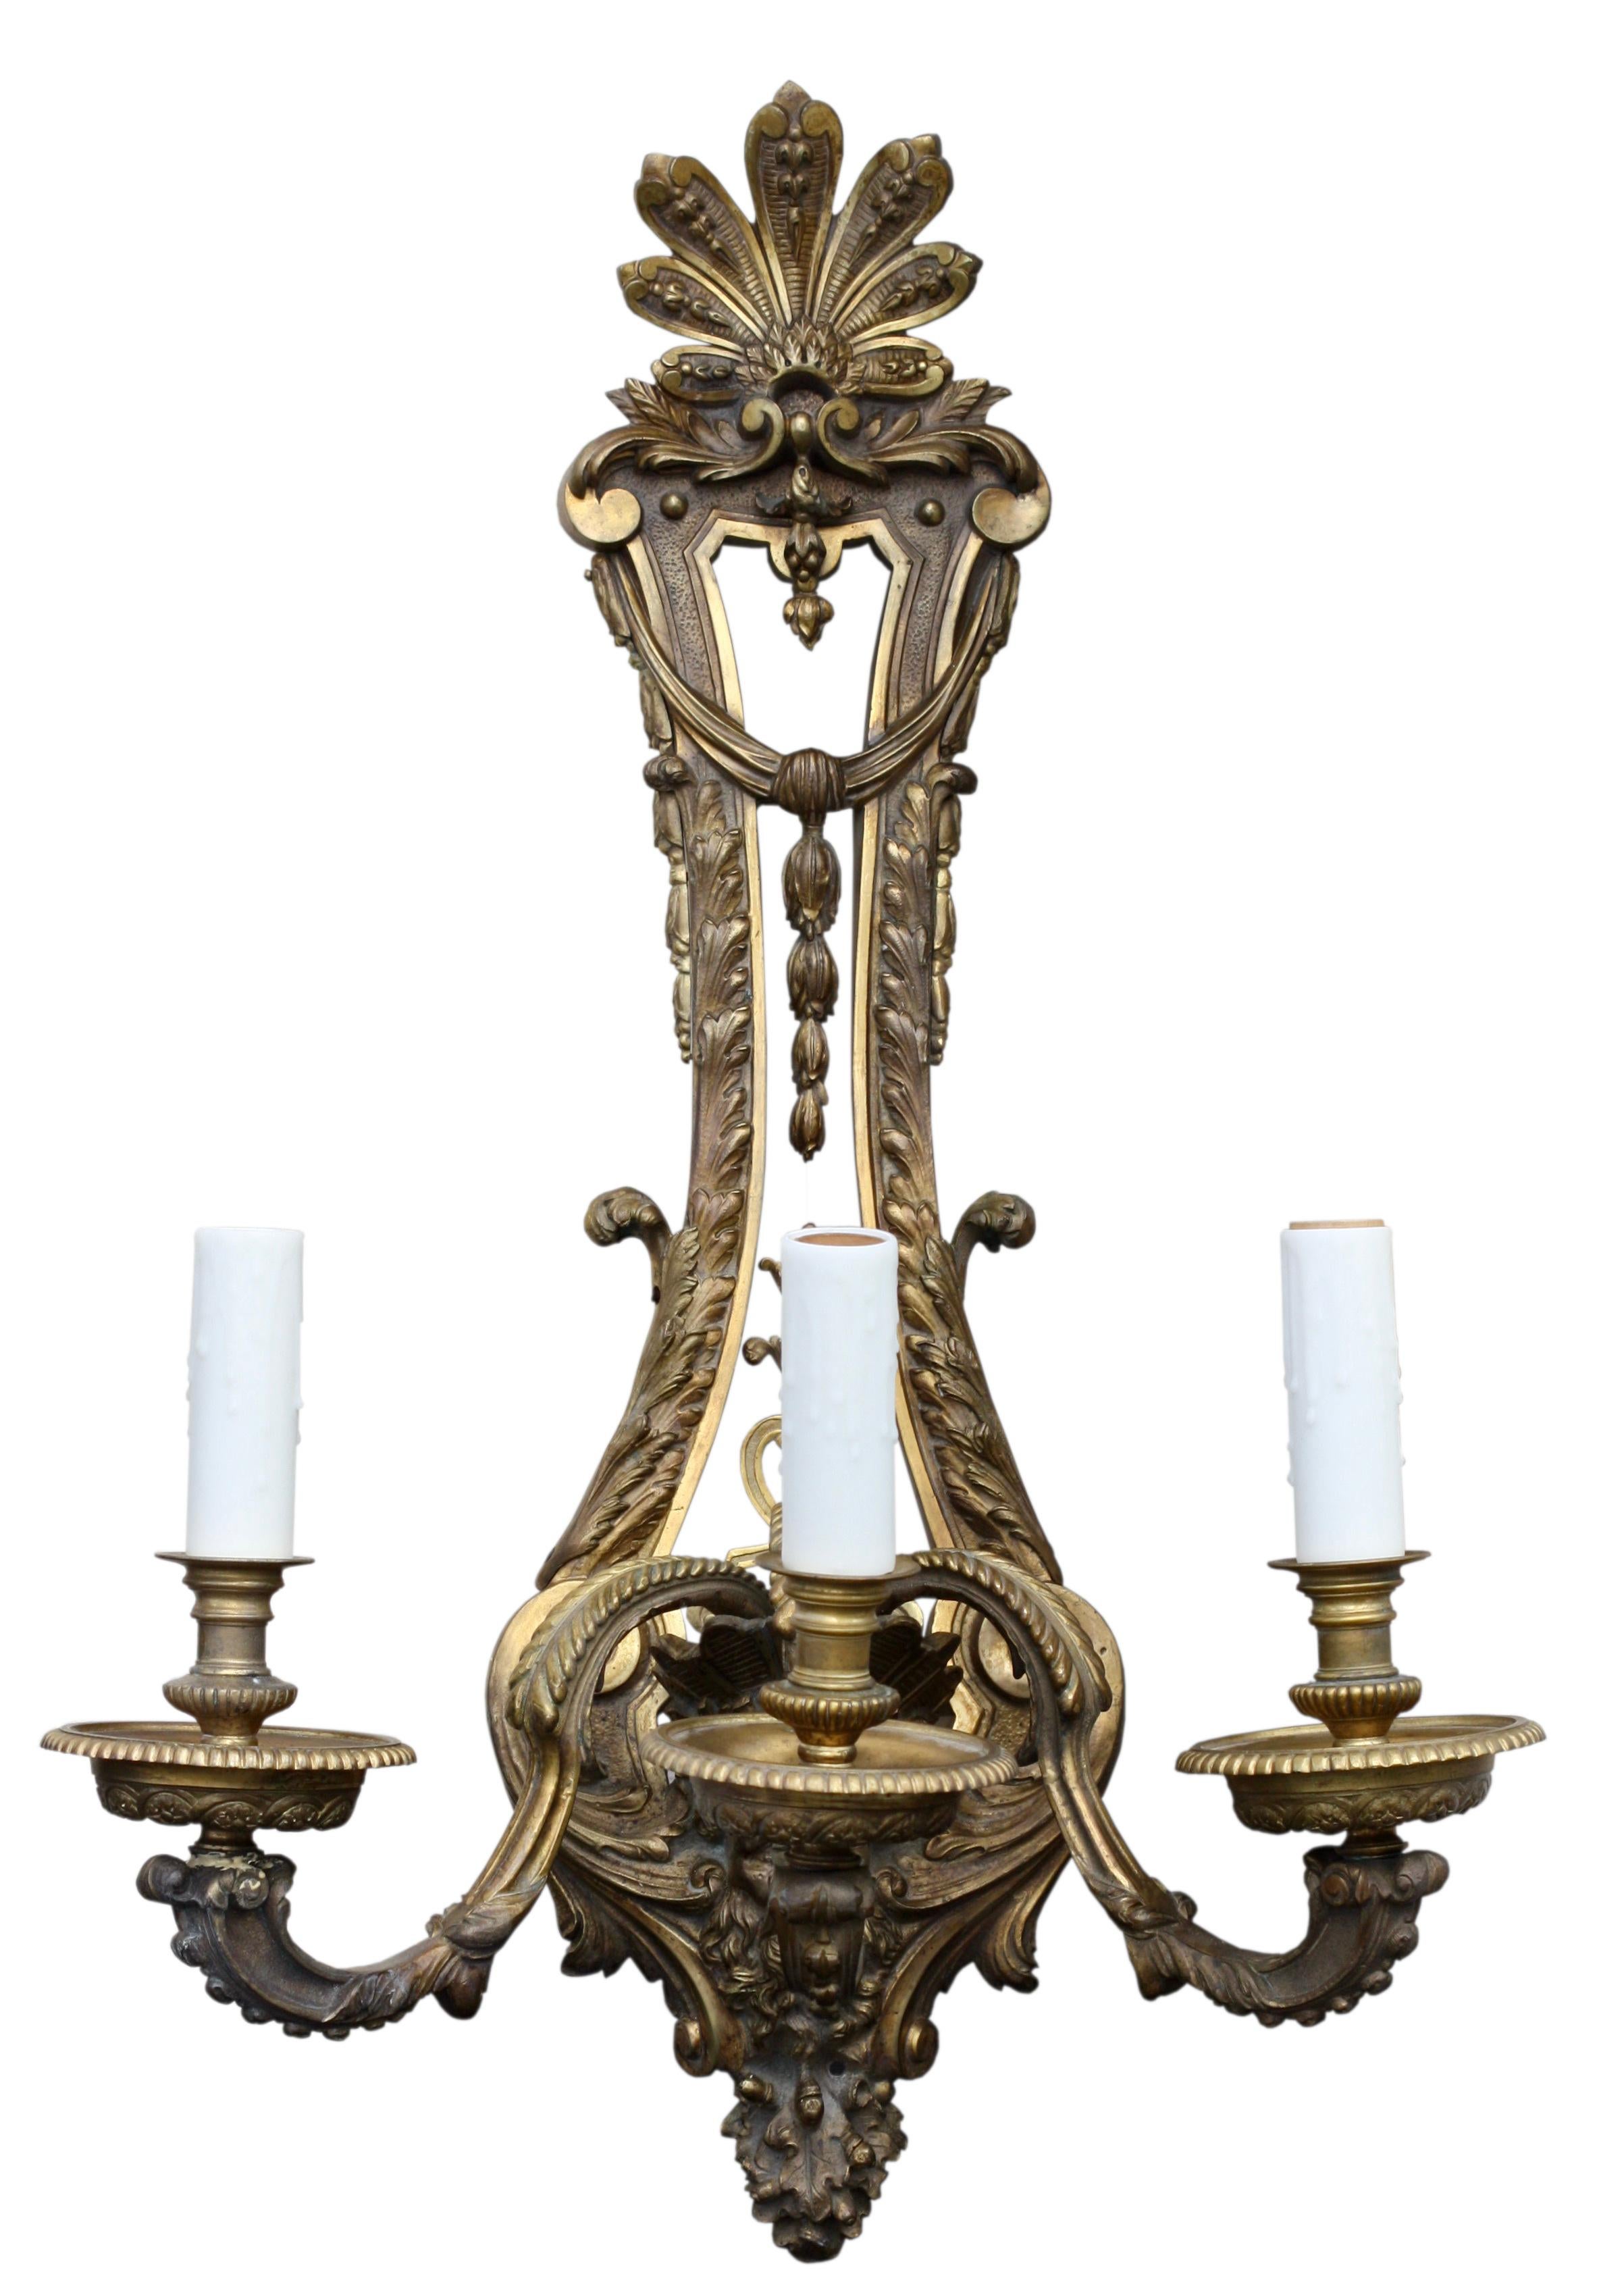 A pair of gilt-bronze sconces, Louis XVI style, circa 1880
The two light console-shaped branches with foliage issued from a fluted cornocupia with acanthus leaves and pearls
Measures: Height 24 in. (60.96 cm.), 
Width 21 in. (53.34 cm.).
 